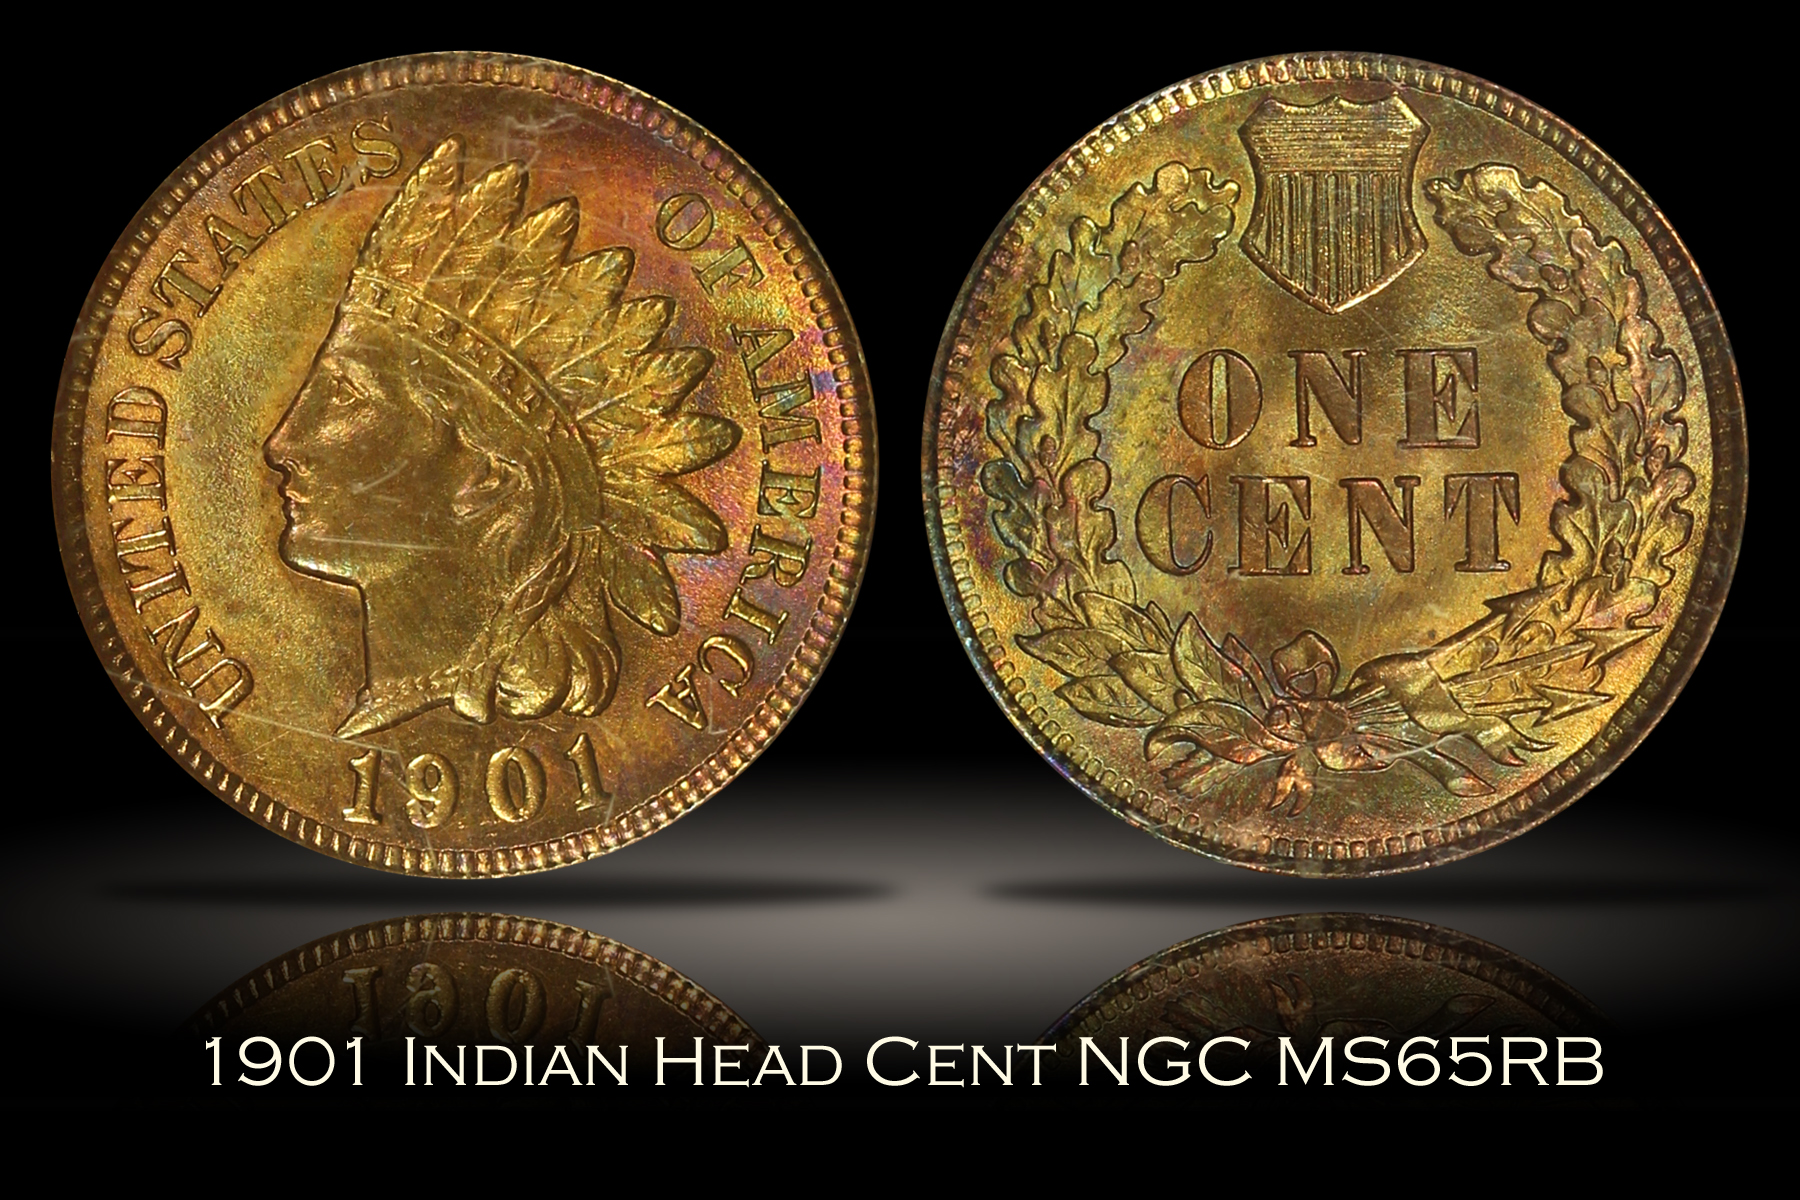 1901 Indian Head Cent NGC MS65RB